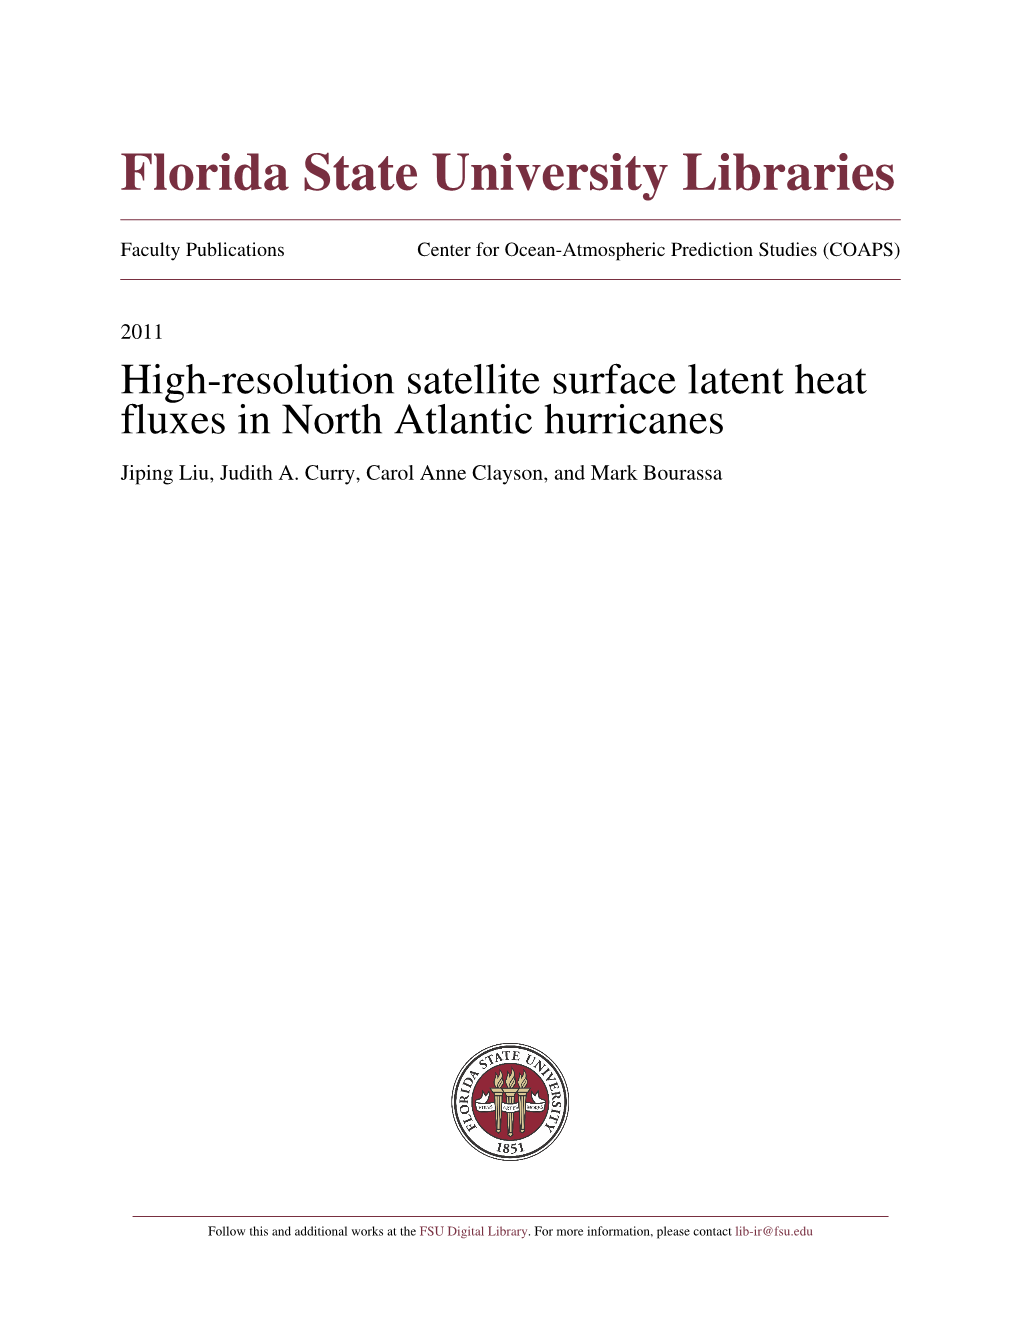 High-Resolution Satellite Surface Latent Heat Fluxes in North Atlantic Hurricanes Jiping Liu, Judith A